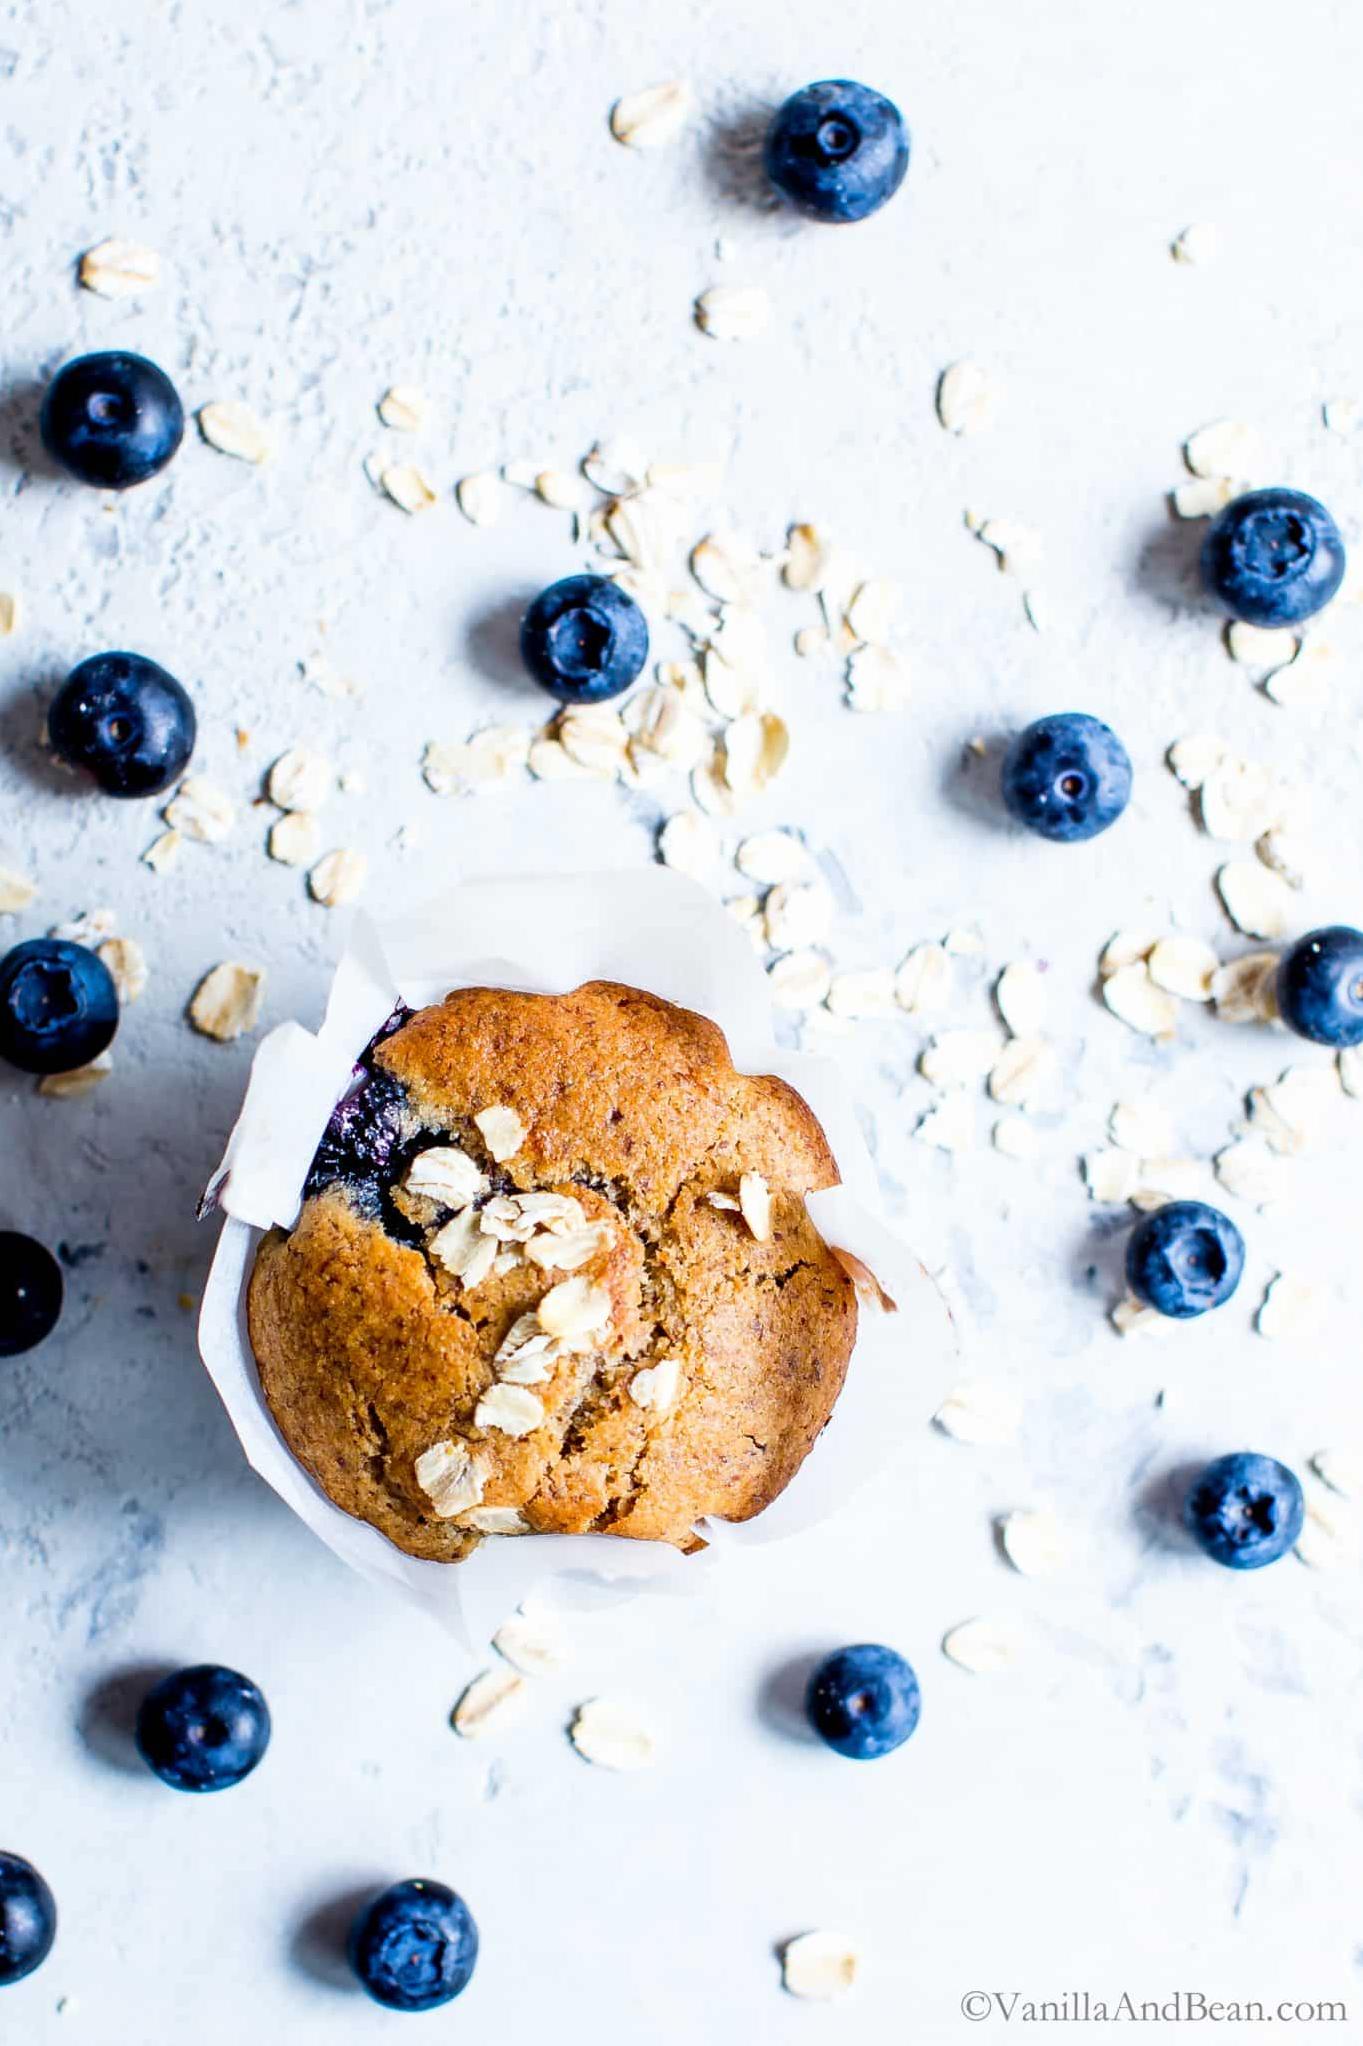  Say goodbye to gluten and dairy while saying hello to these moist and flavorful muffins.